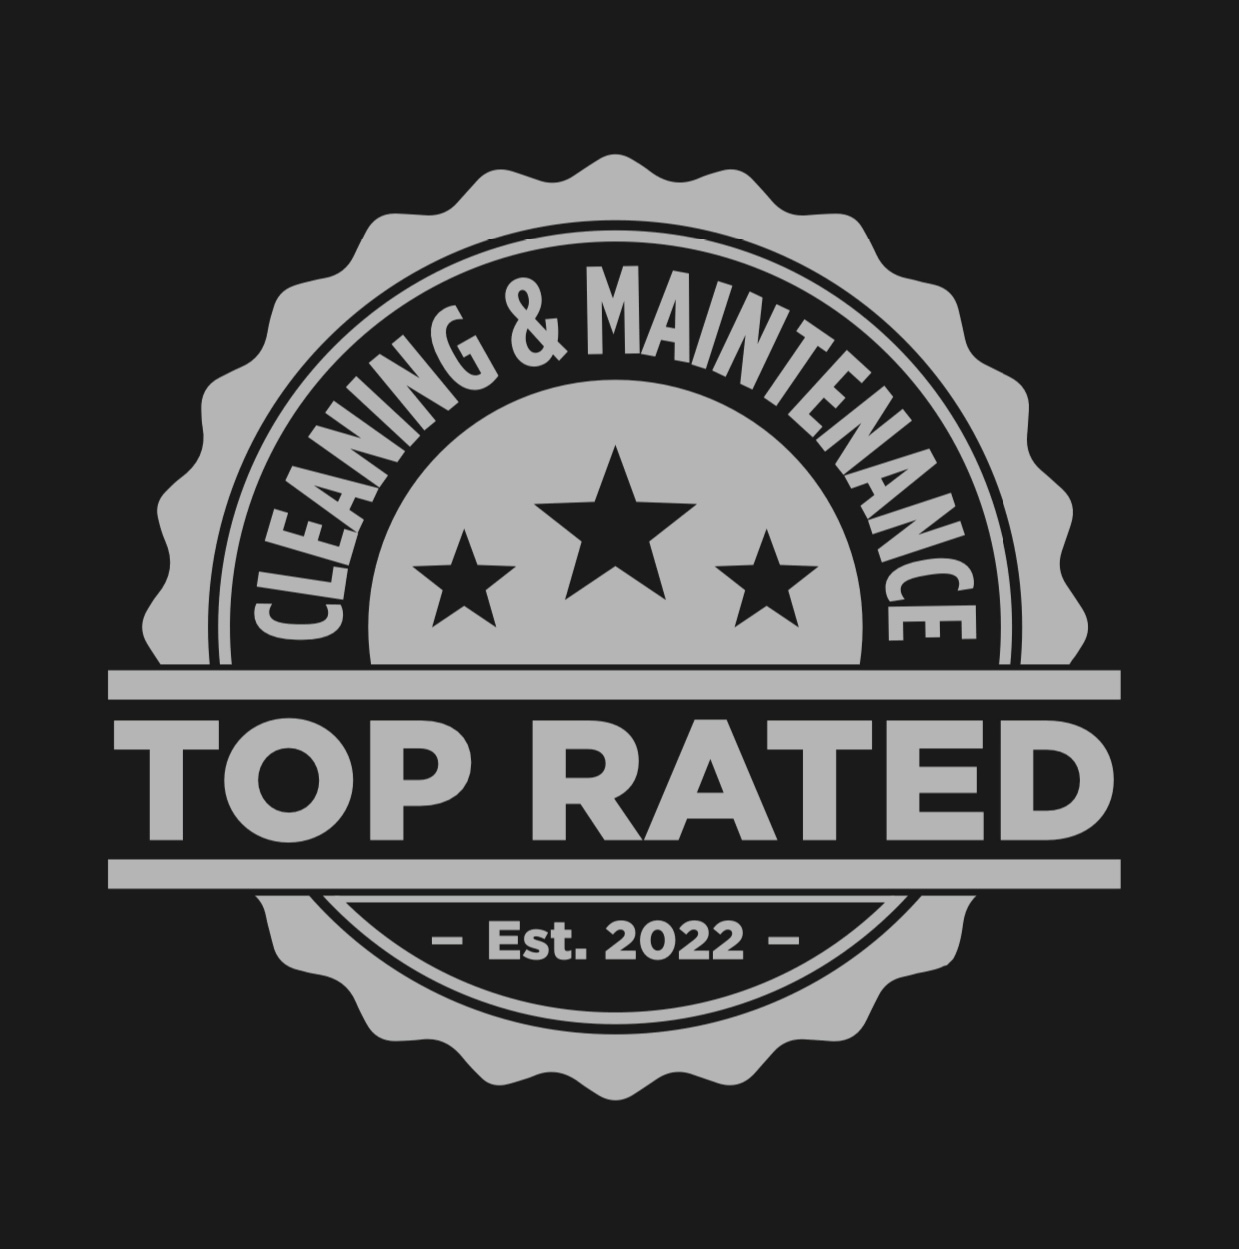 Top Rated Cleaning & Maintenance